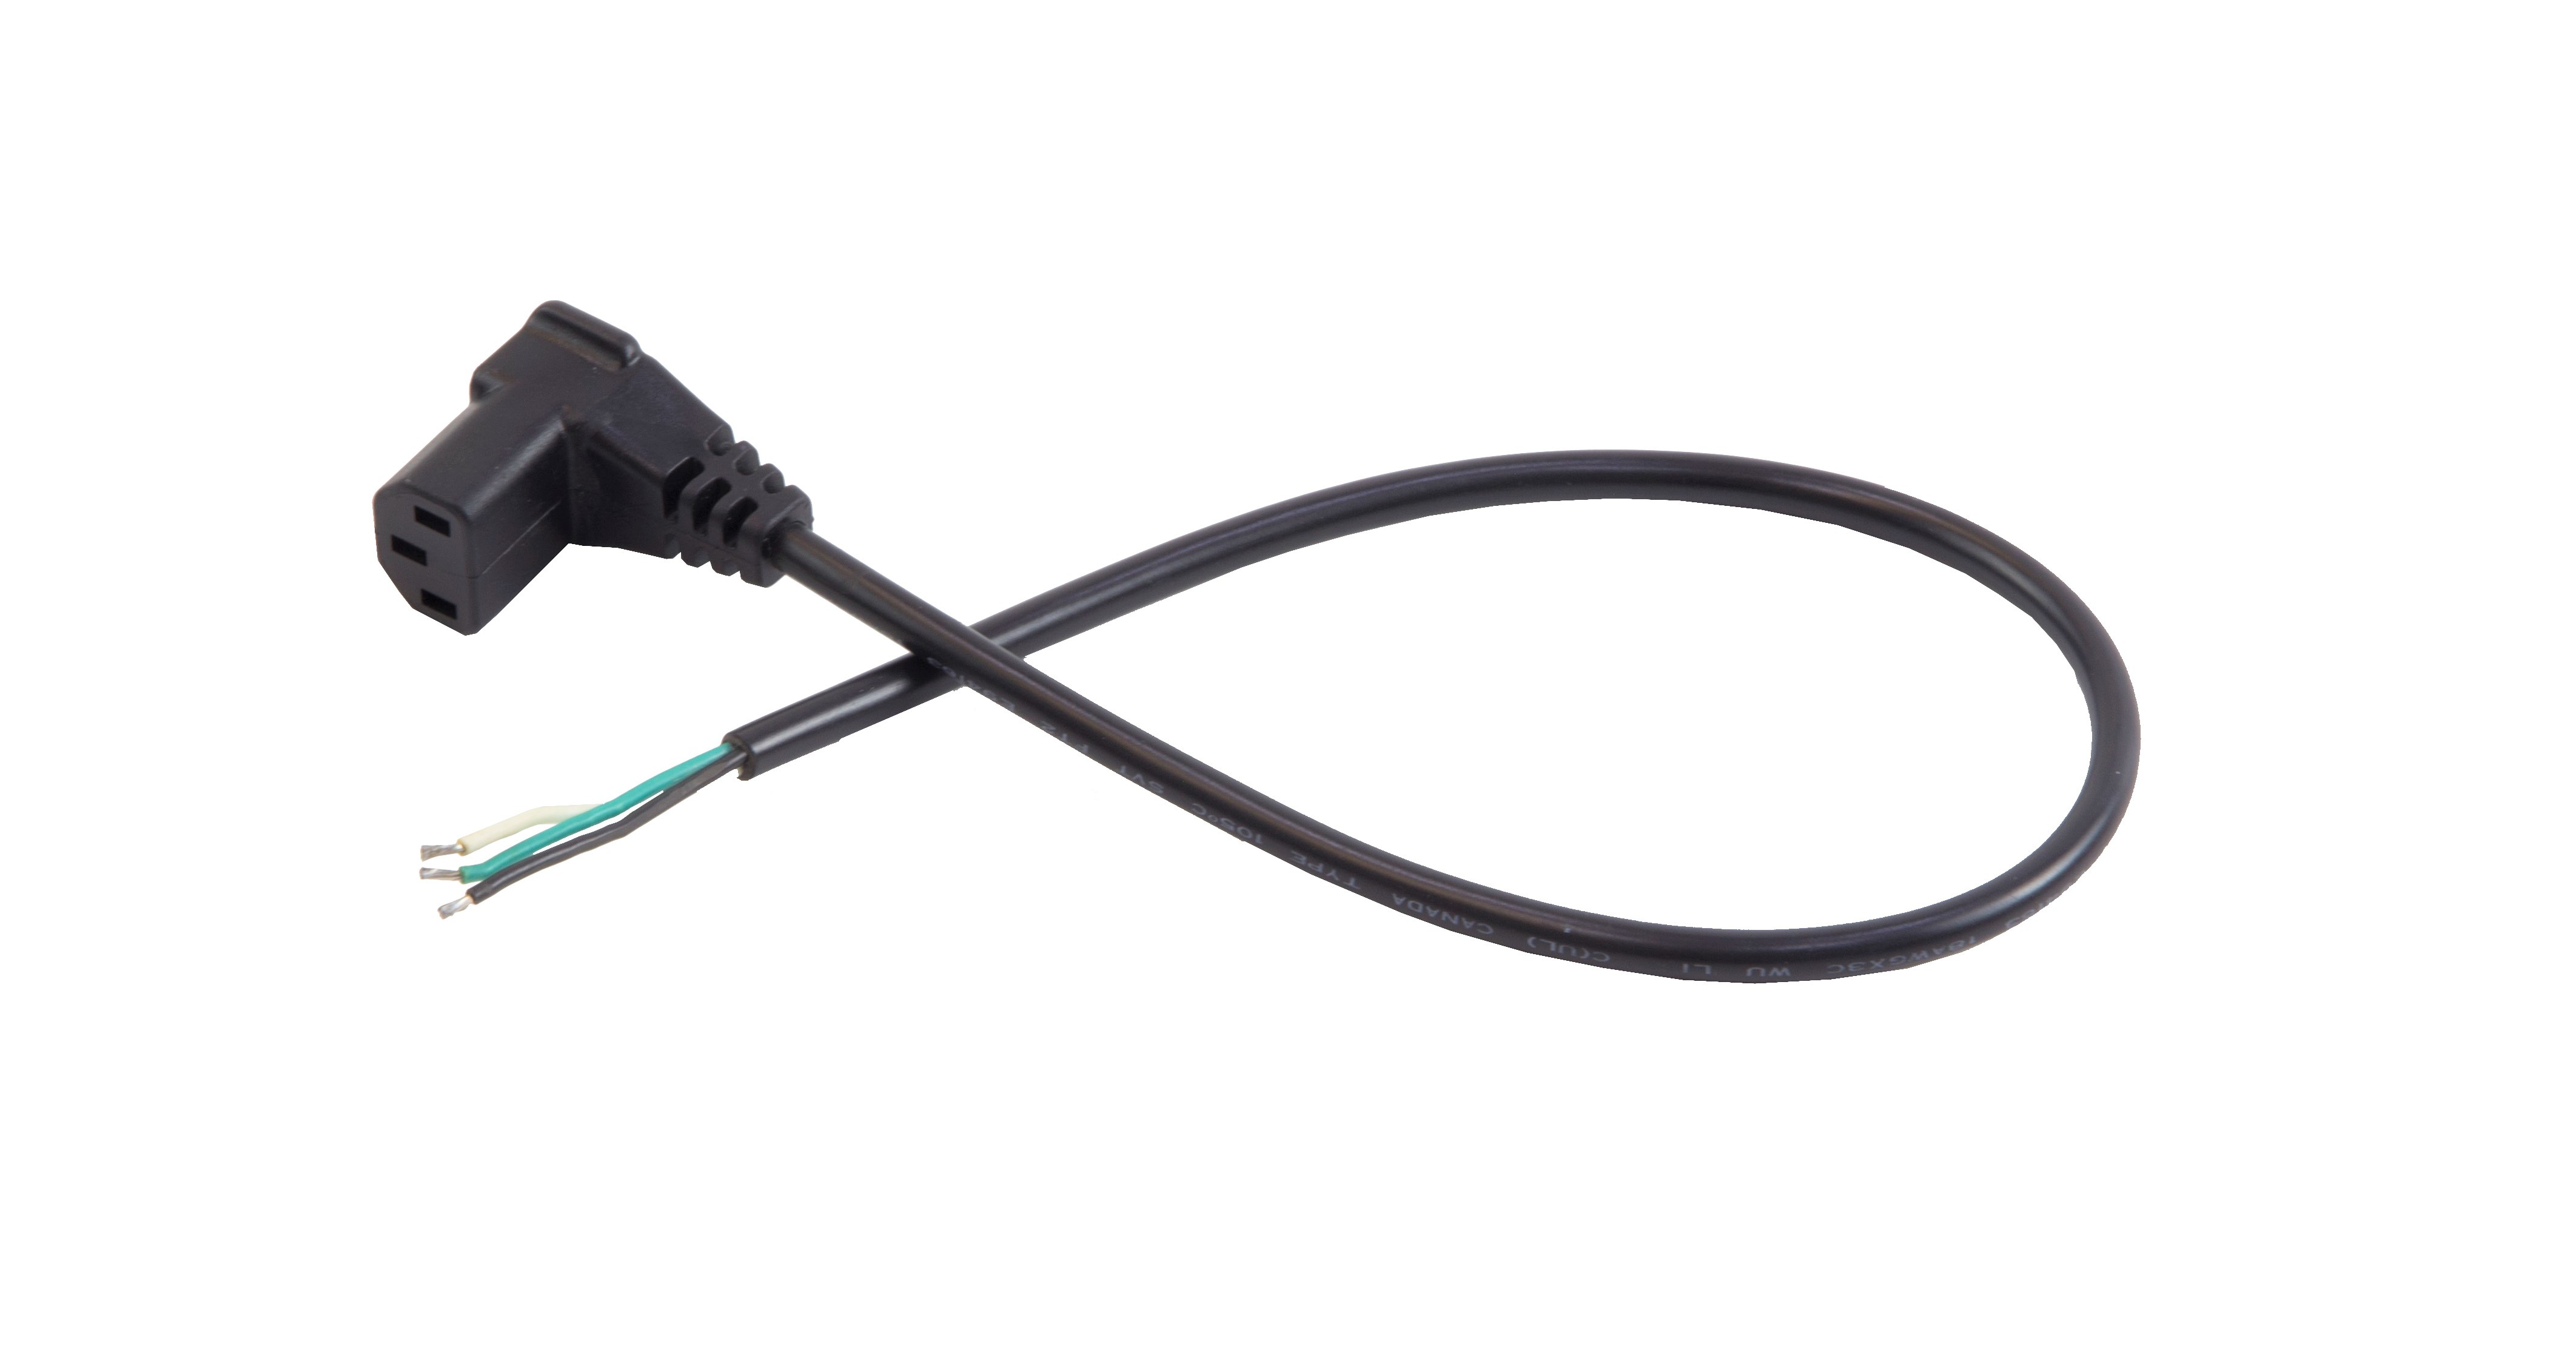 90 DEGREE POWER CORD-HEAD  |Products|Accessories|Cable & Cord